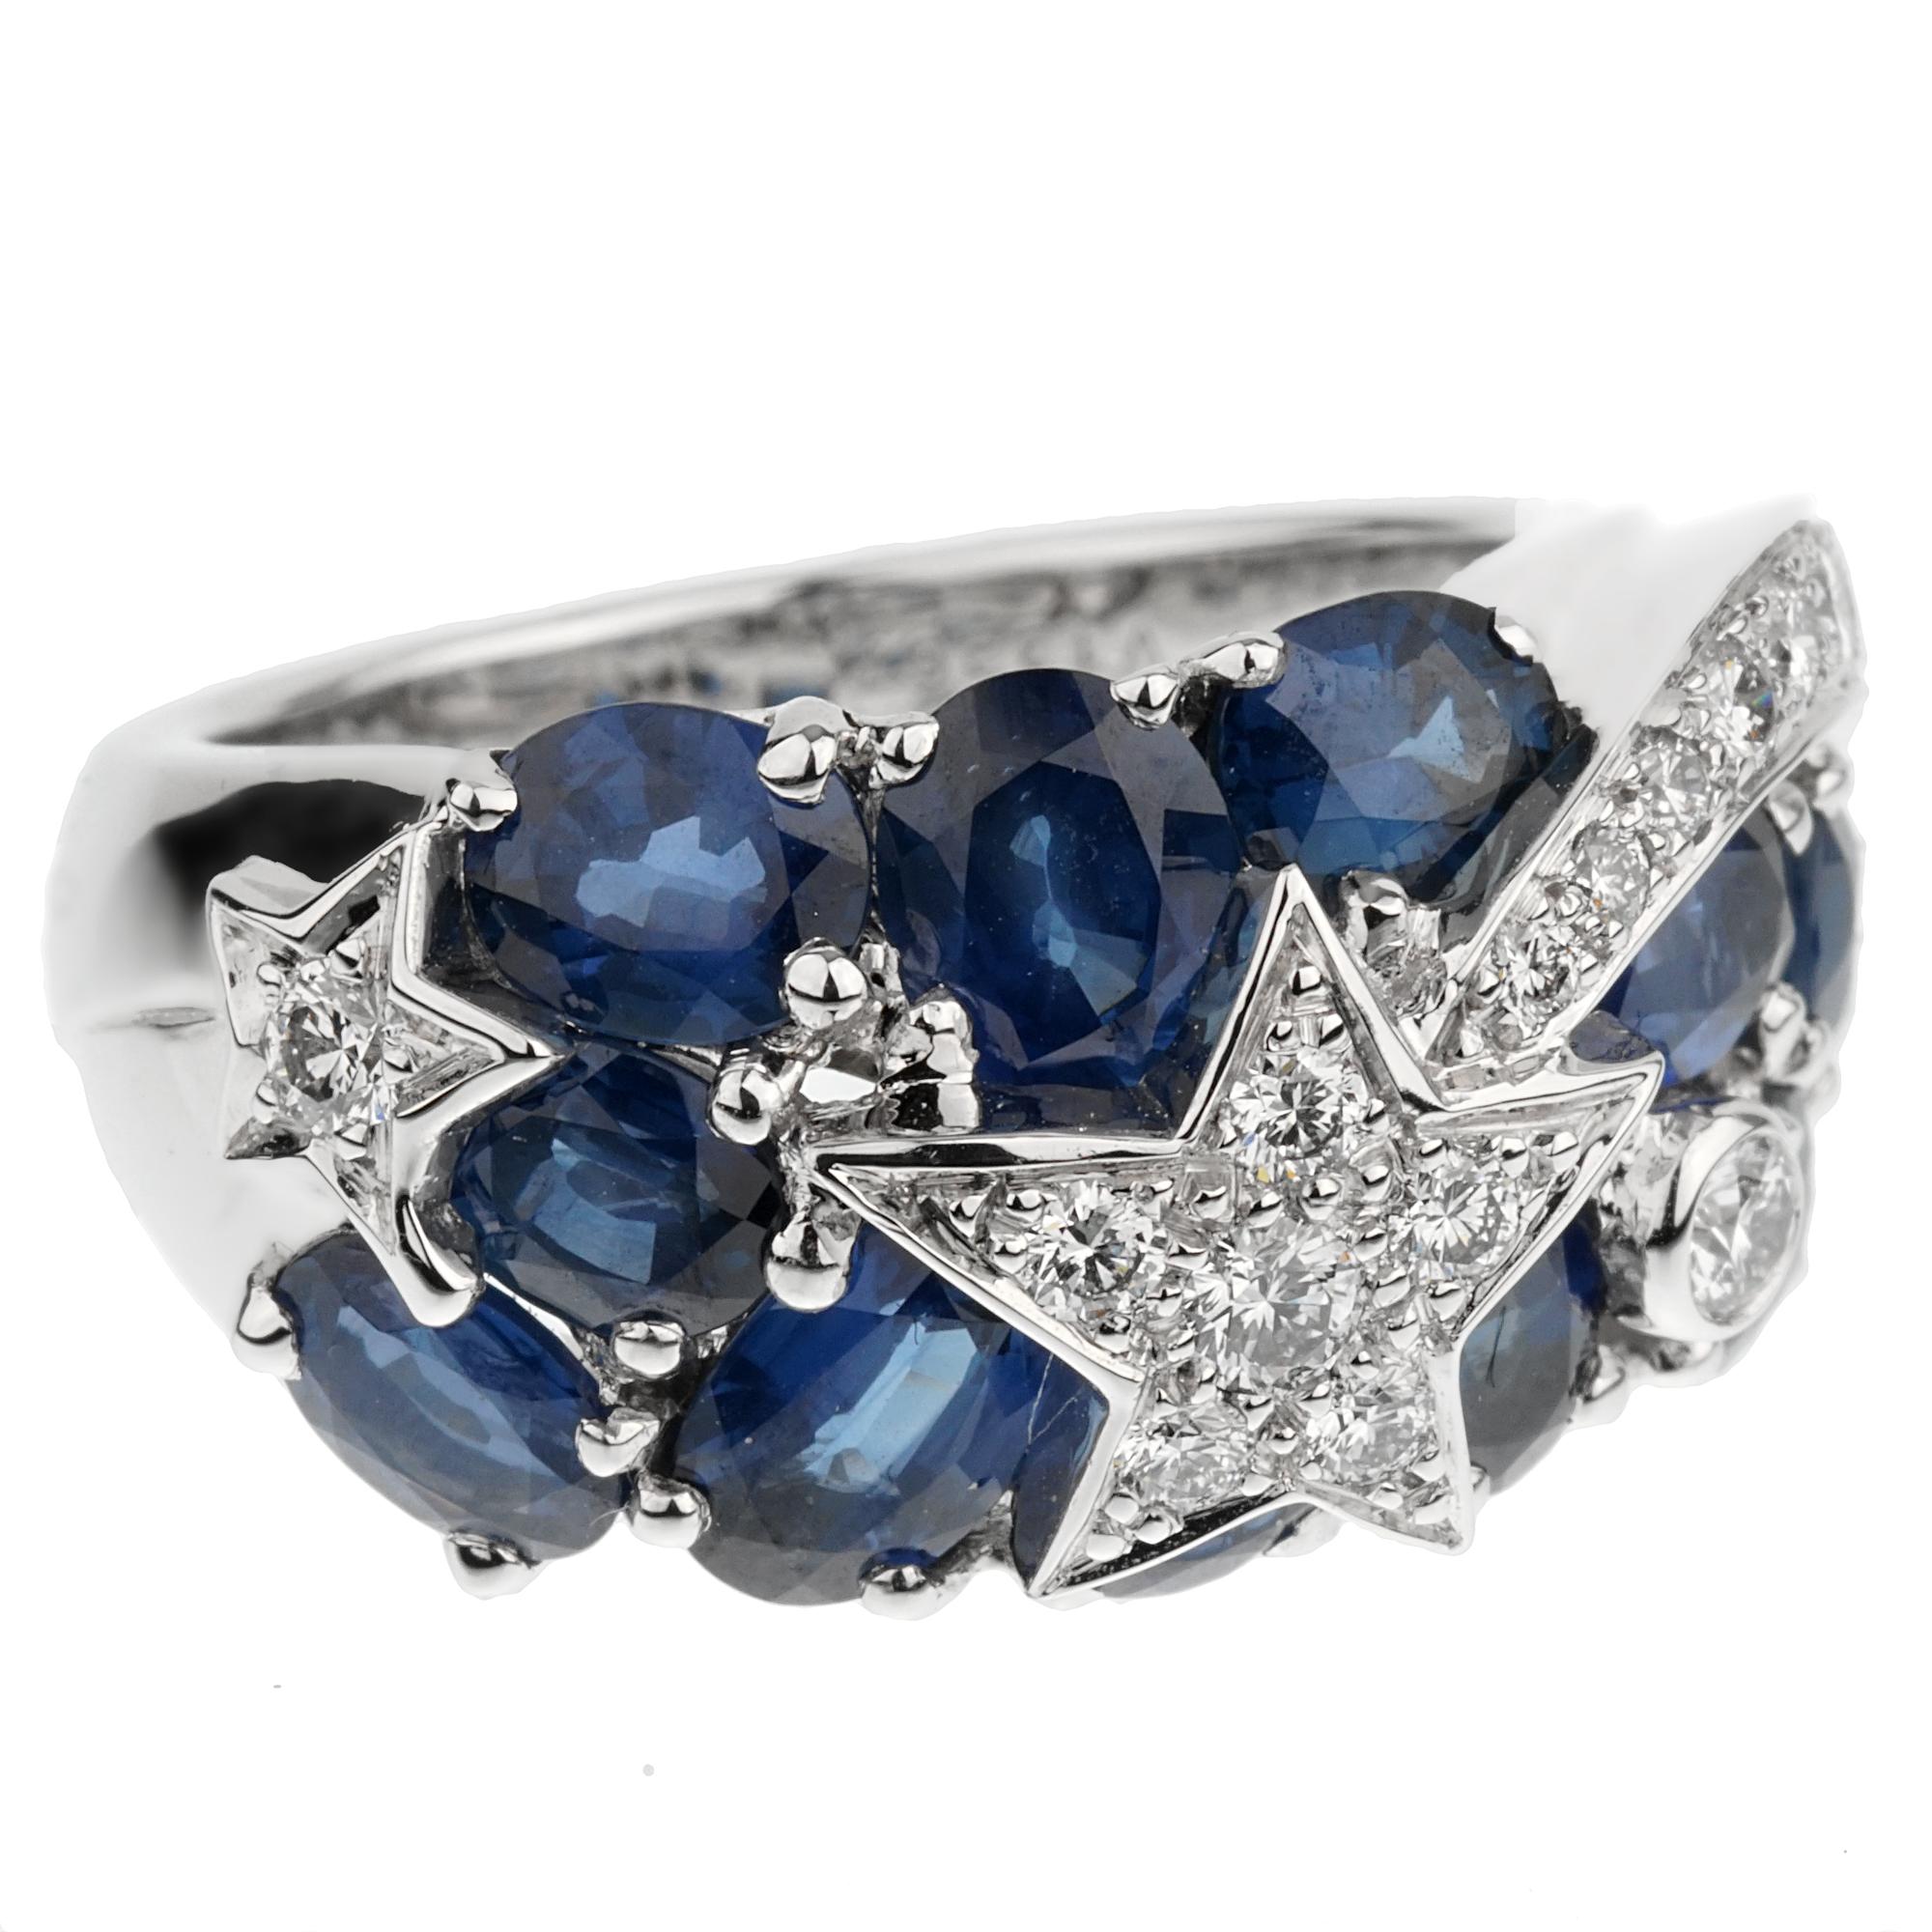 An iconic Chanel cocktail ring from the Comete collection showcasing deep blue sapphires and the iconic stars adorned with round brilliant cut diamonds in 18k white gold. The ring measures a size 5 3/4 and can be resized.